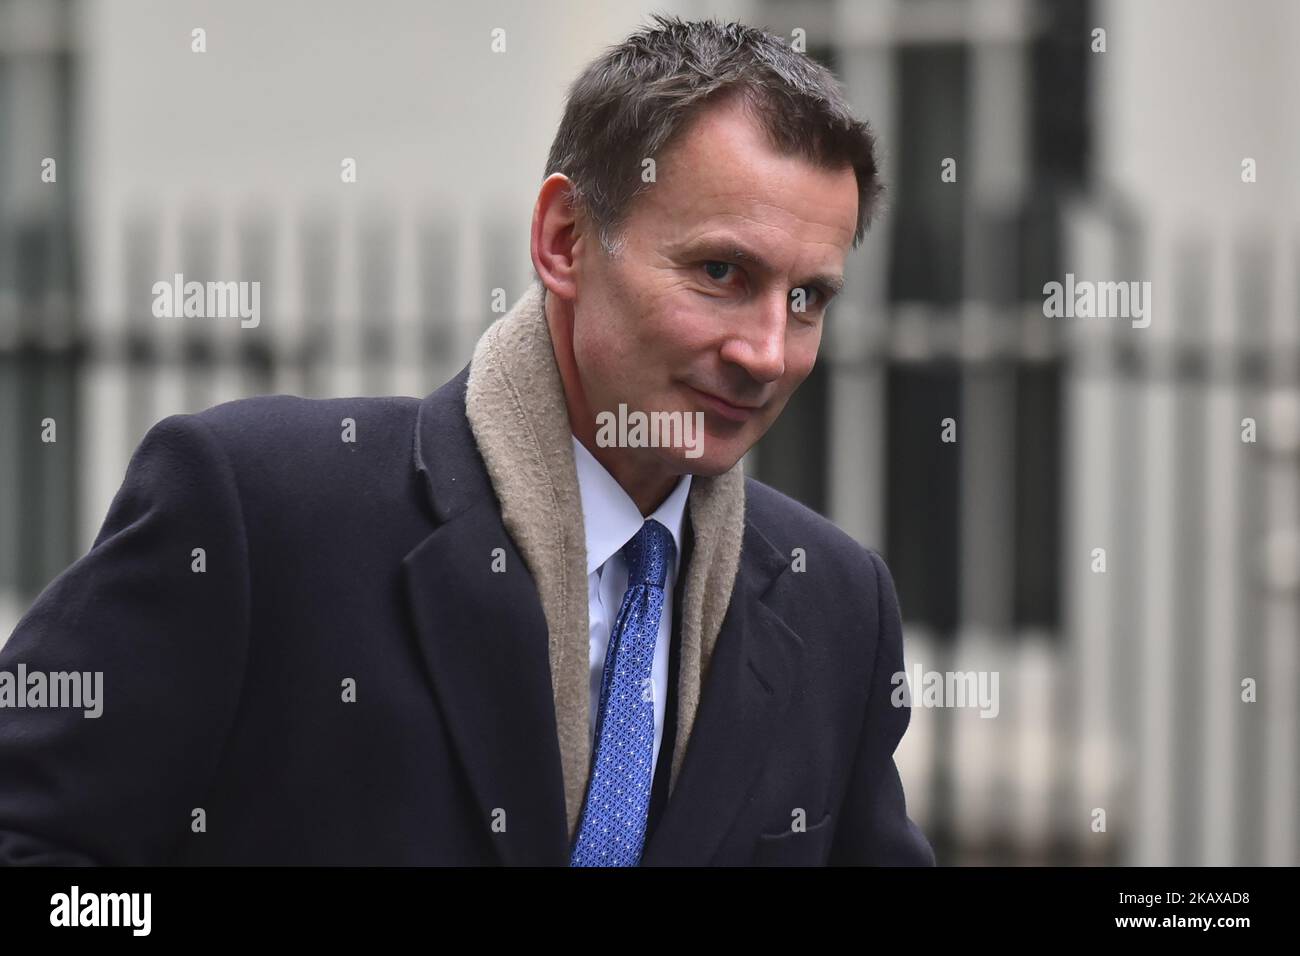 British Health Secretary Jeremy Hunt leaves 10 Downing Street after attending the weekly Cabinet Meeting, London on March 27, 2018. Prime Minister Theresa May is facing another Brexit hurdle after the opposition Labour Party announced its pushing for a legal commitment to avoid a hard border with Ireland after Britain leaves the European Union. The Migration Advisory Committee (MAC) said businesses are concerned about their ability to recruit workers from the EU after Britain leaves the EU. UK employers also see EU workers as 'more reliable' and eager than their British counterparts, the repor Stock Photo